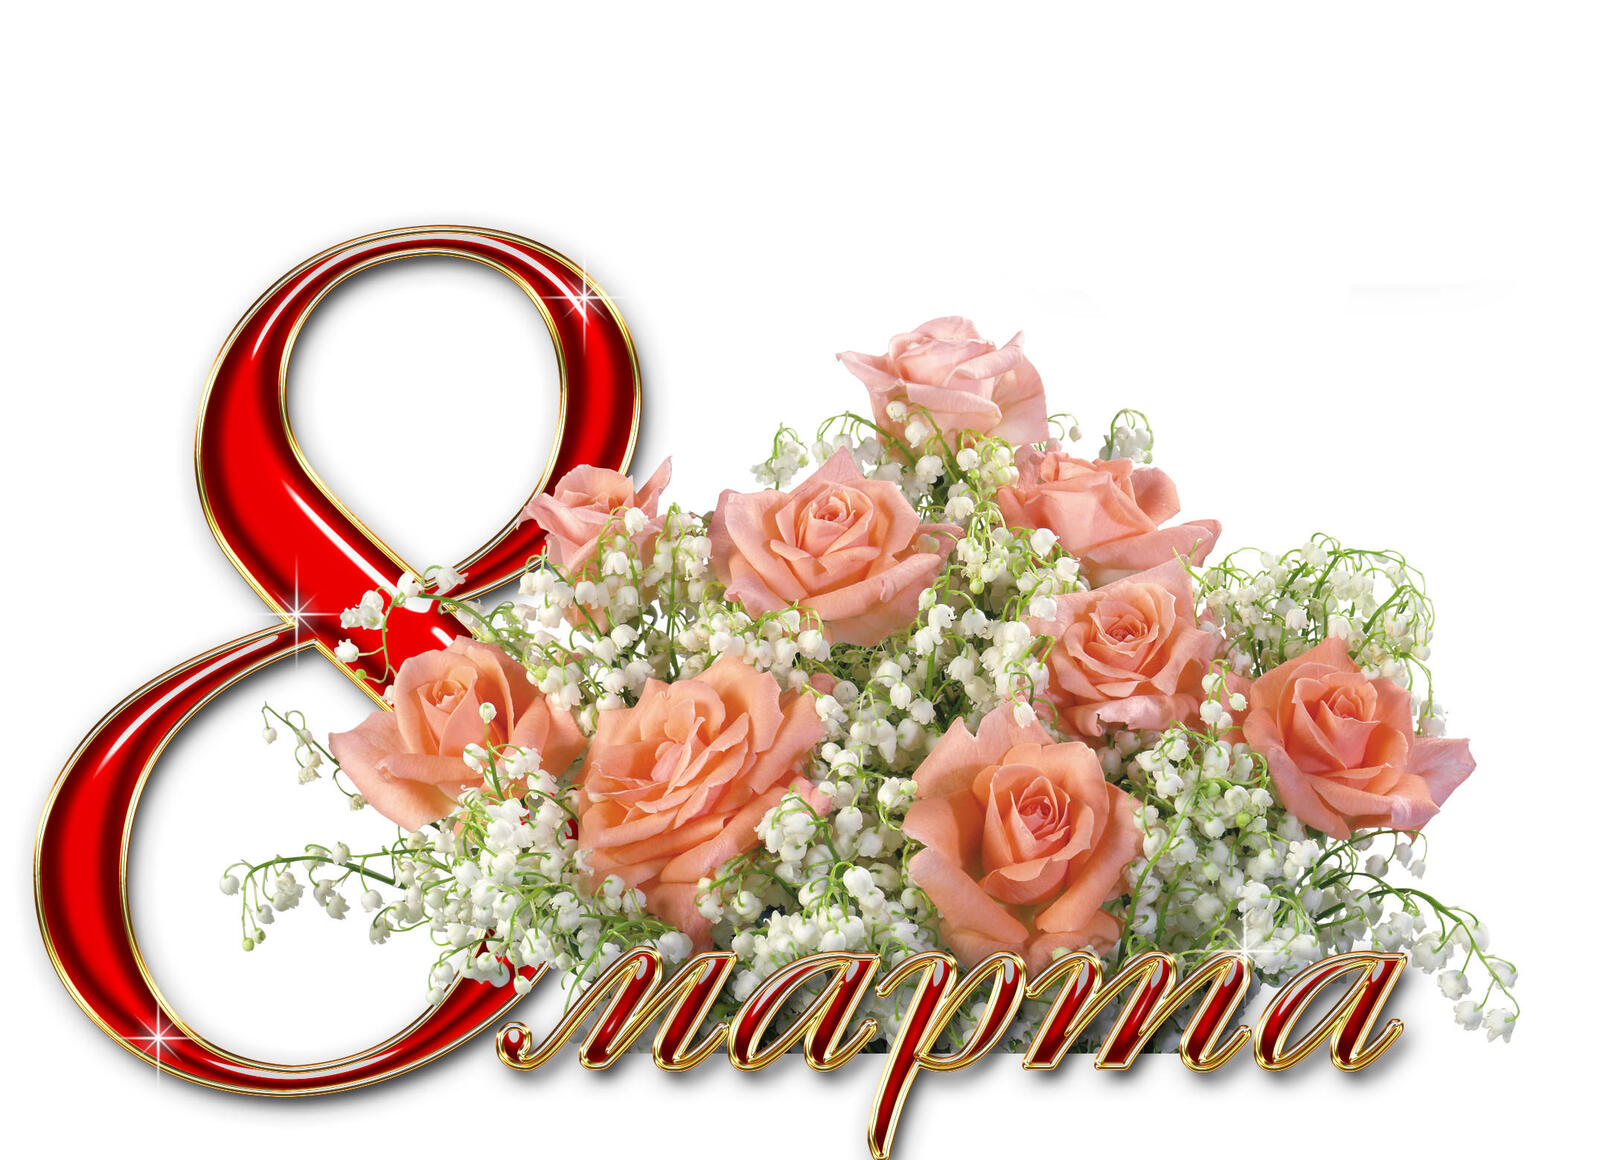 Wallpapers March 8 Congratulations to ladies on holiday on the desktop